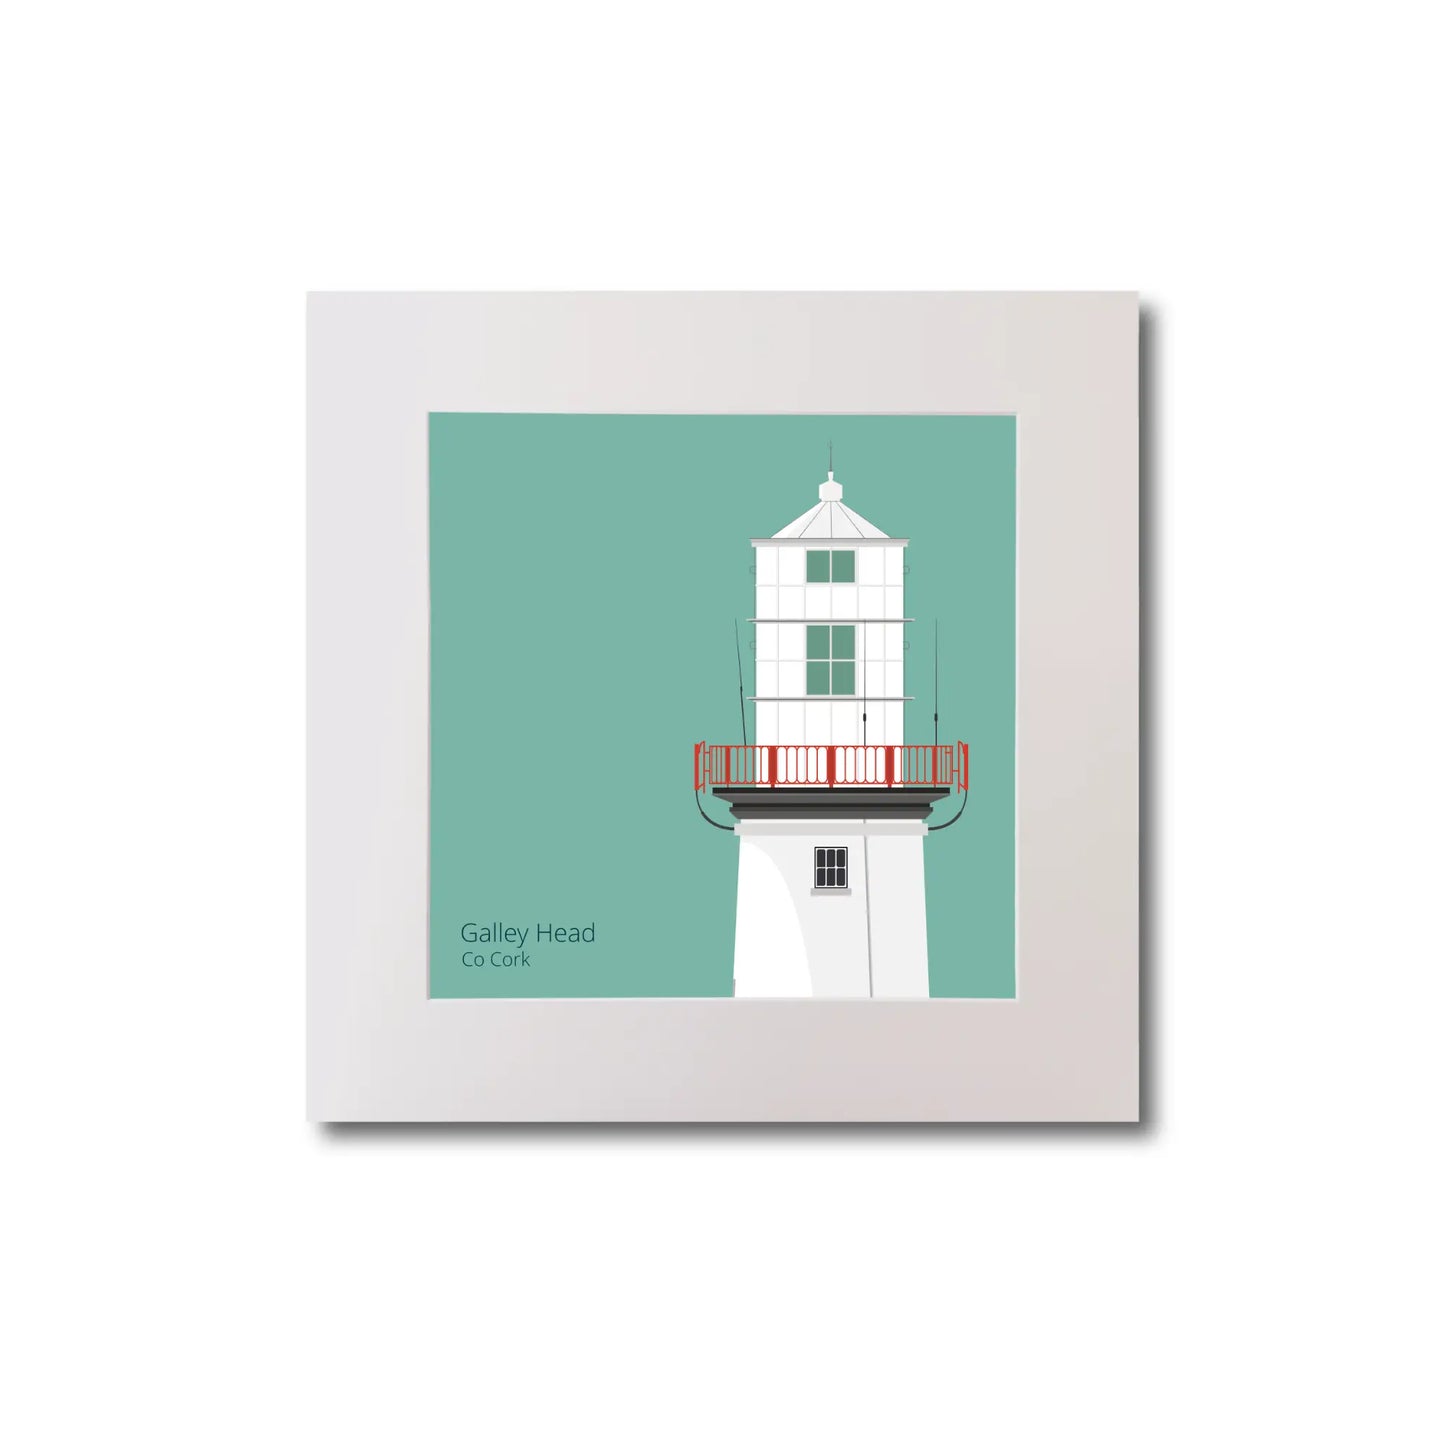 Illustration of Galley Head lighthouse on an ocean green background, mounted and measuring 20x20cm.